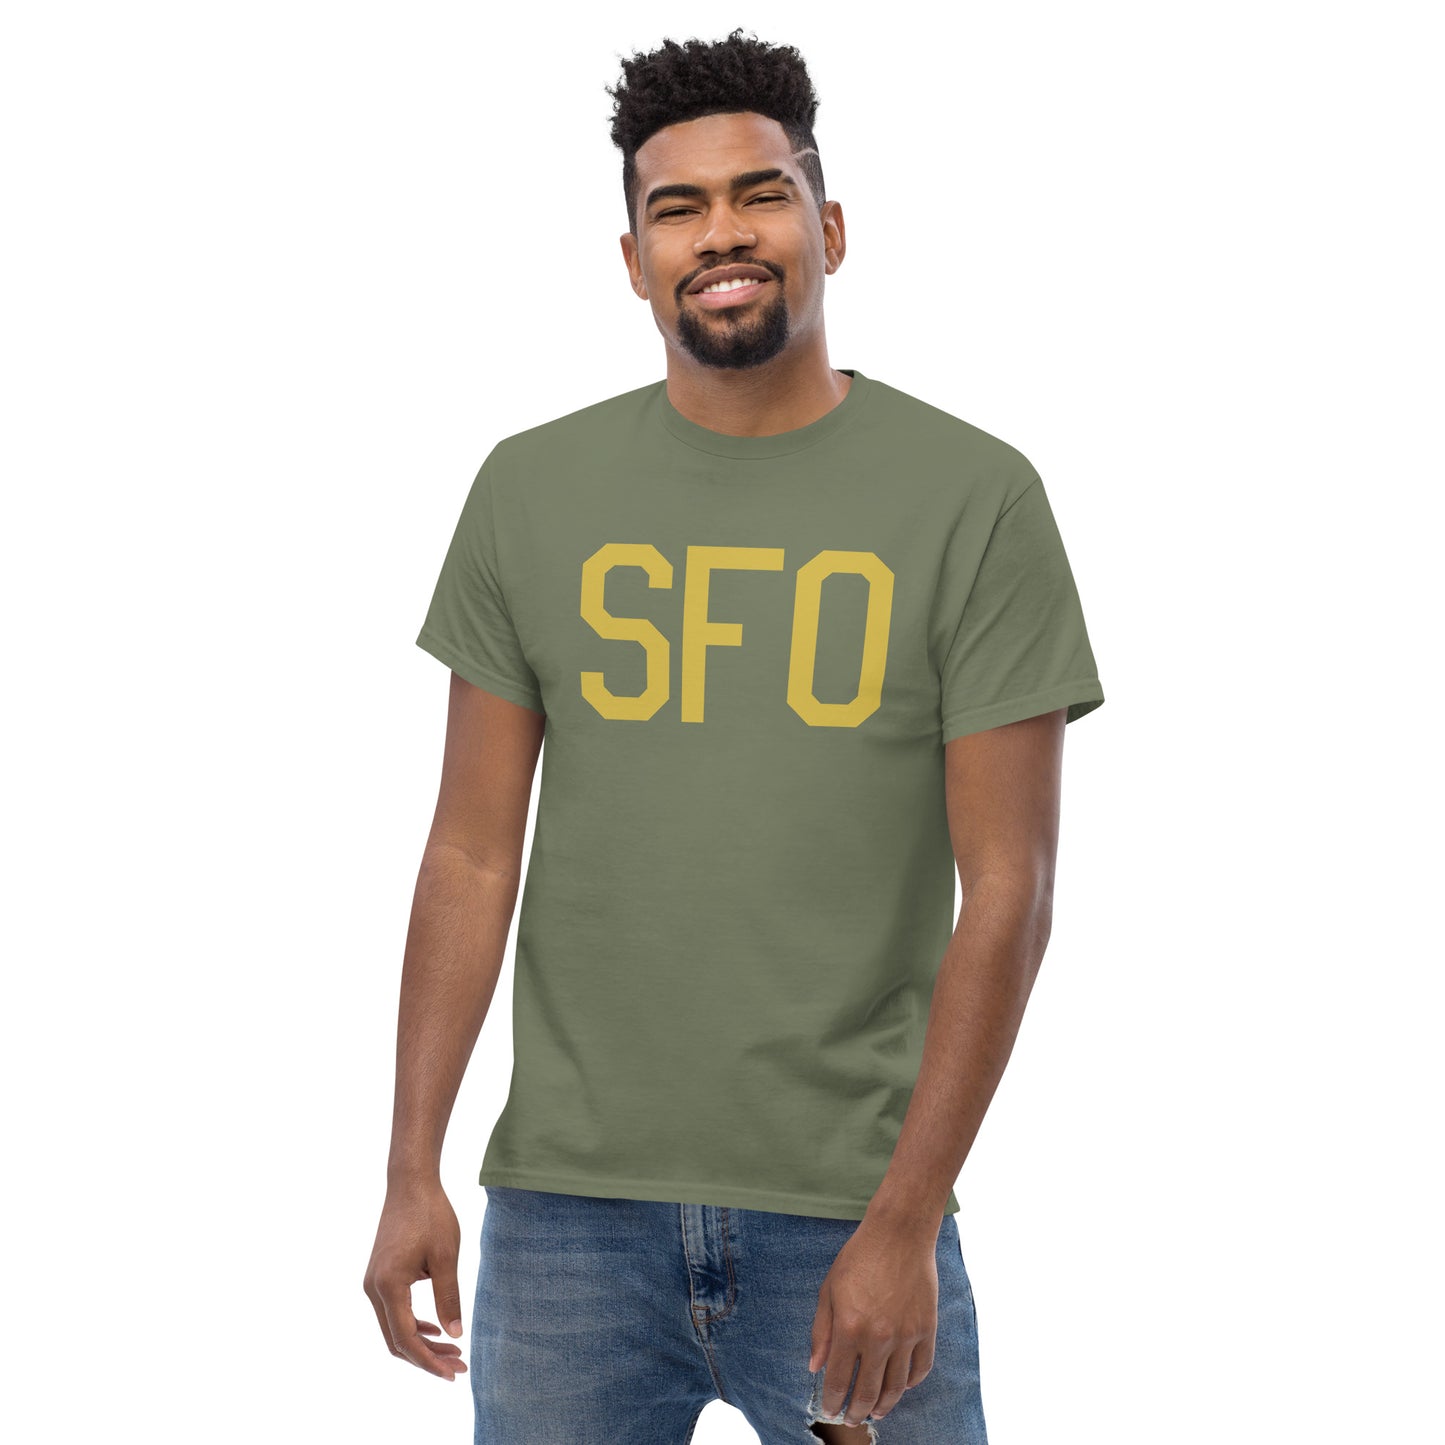 Aviation Enthusiast Men's Tee - Old Gold Graphic • SFO San Francisco • YHM Designs - Image 06